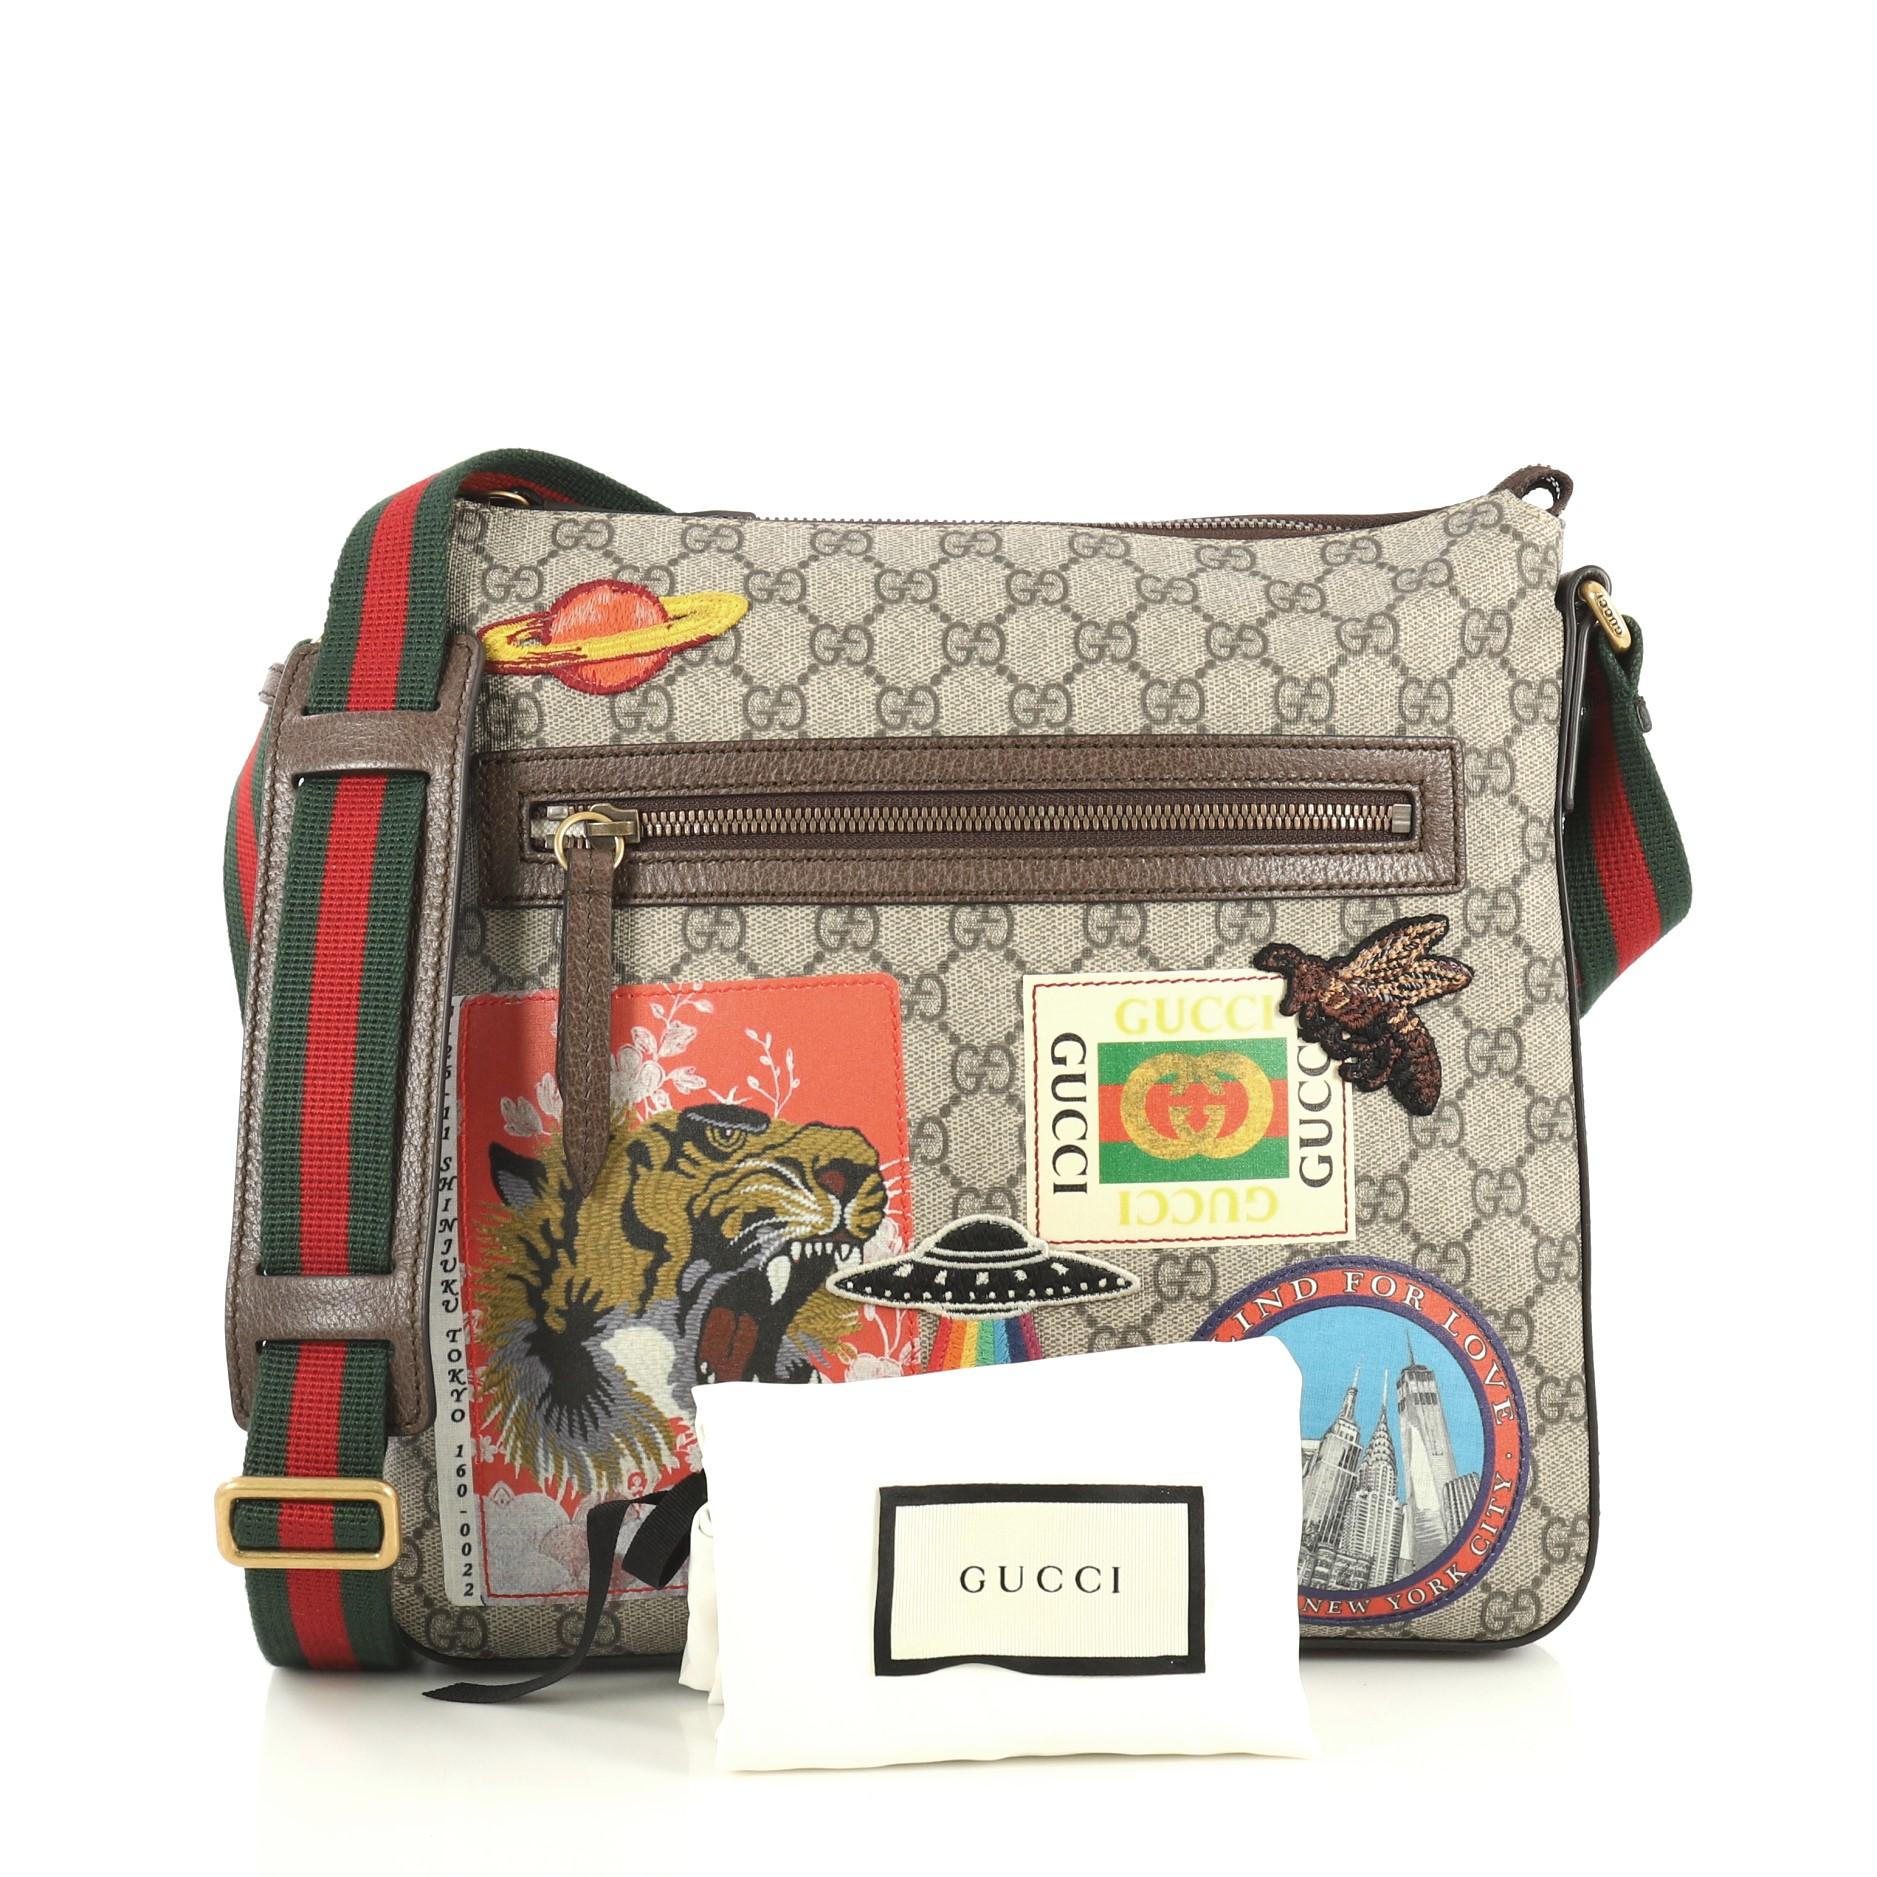 This Gucci Courrier Zip Messenger GG Coated Canvas with Applique Medium, crafted in brown GG supreme coated canvas, features an adjustable web strap, exterior front zip pocket, leather trim, embroidered multicolor appliques, and bronze-tone